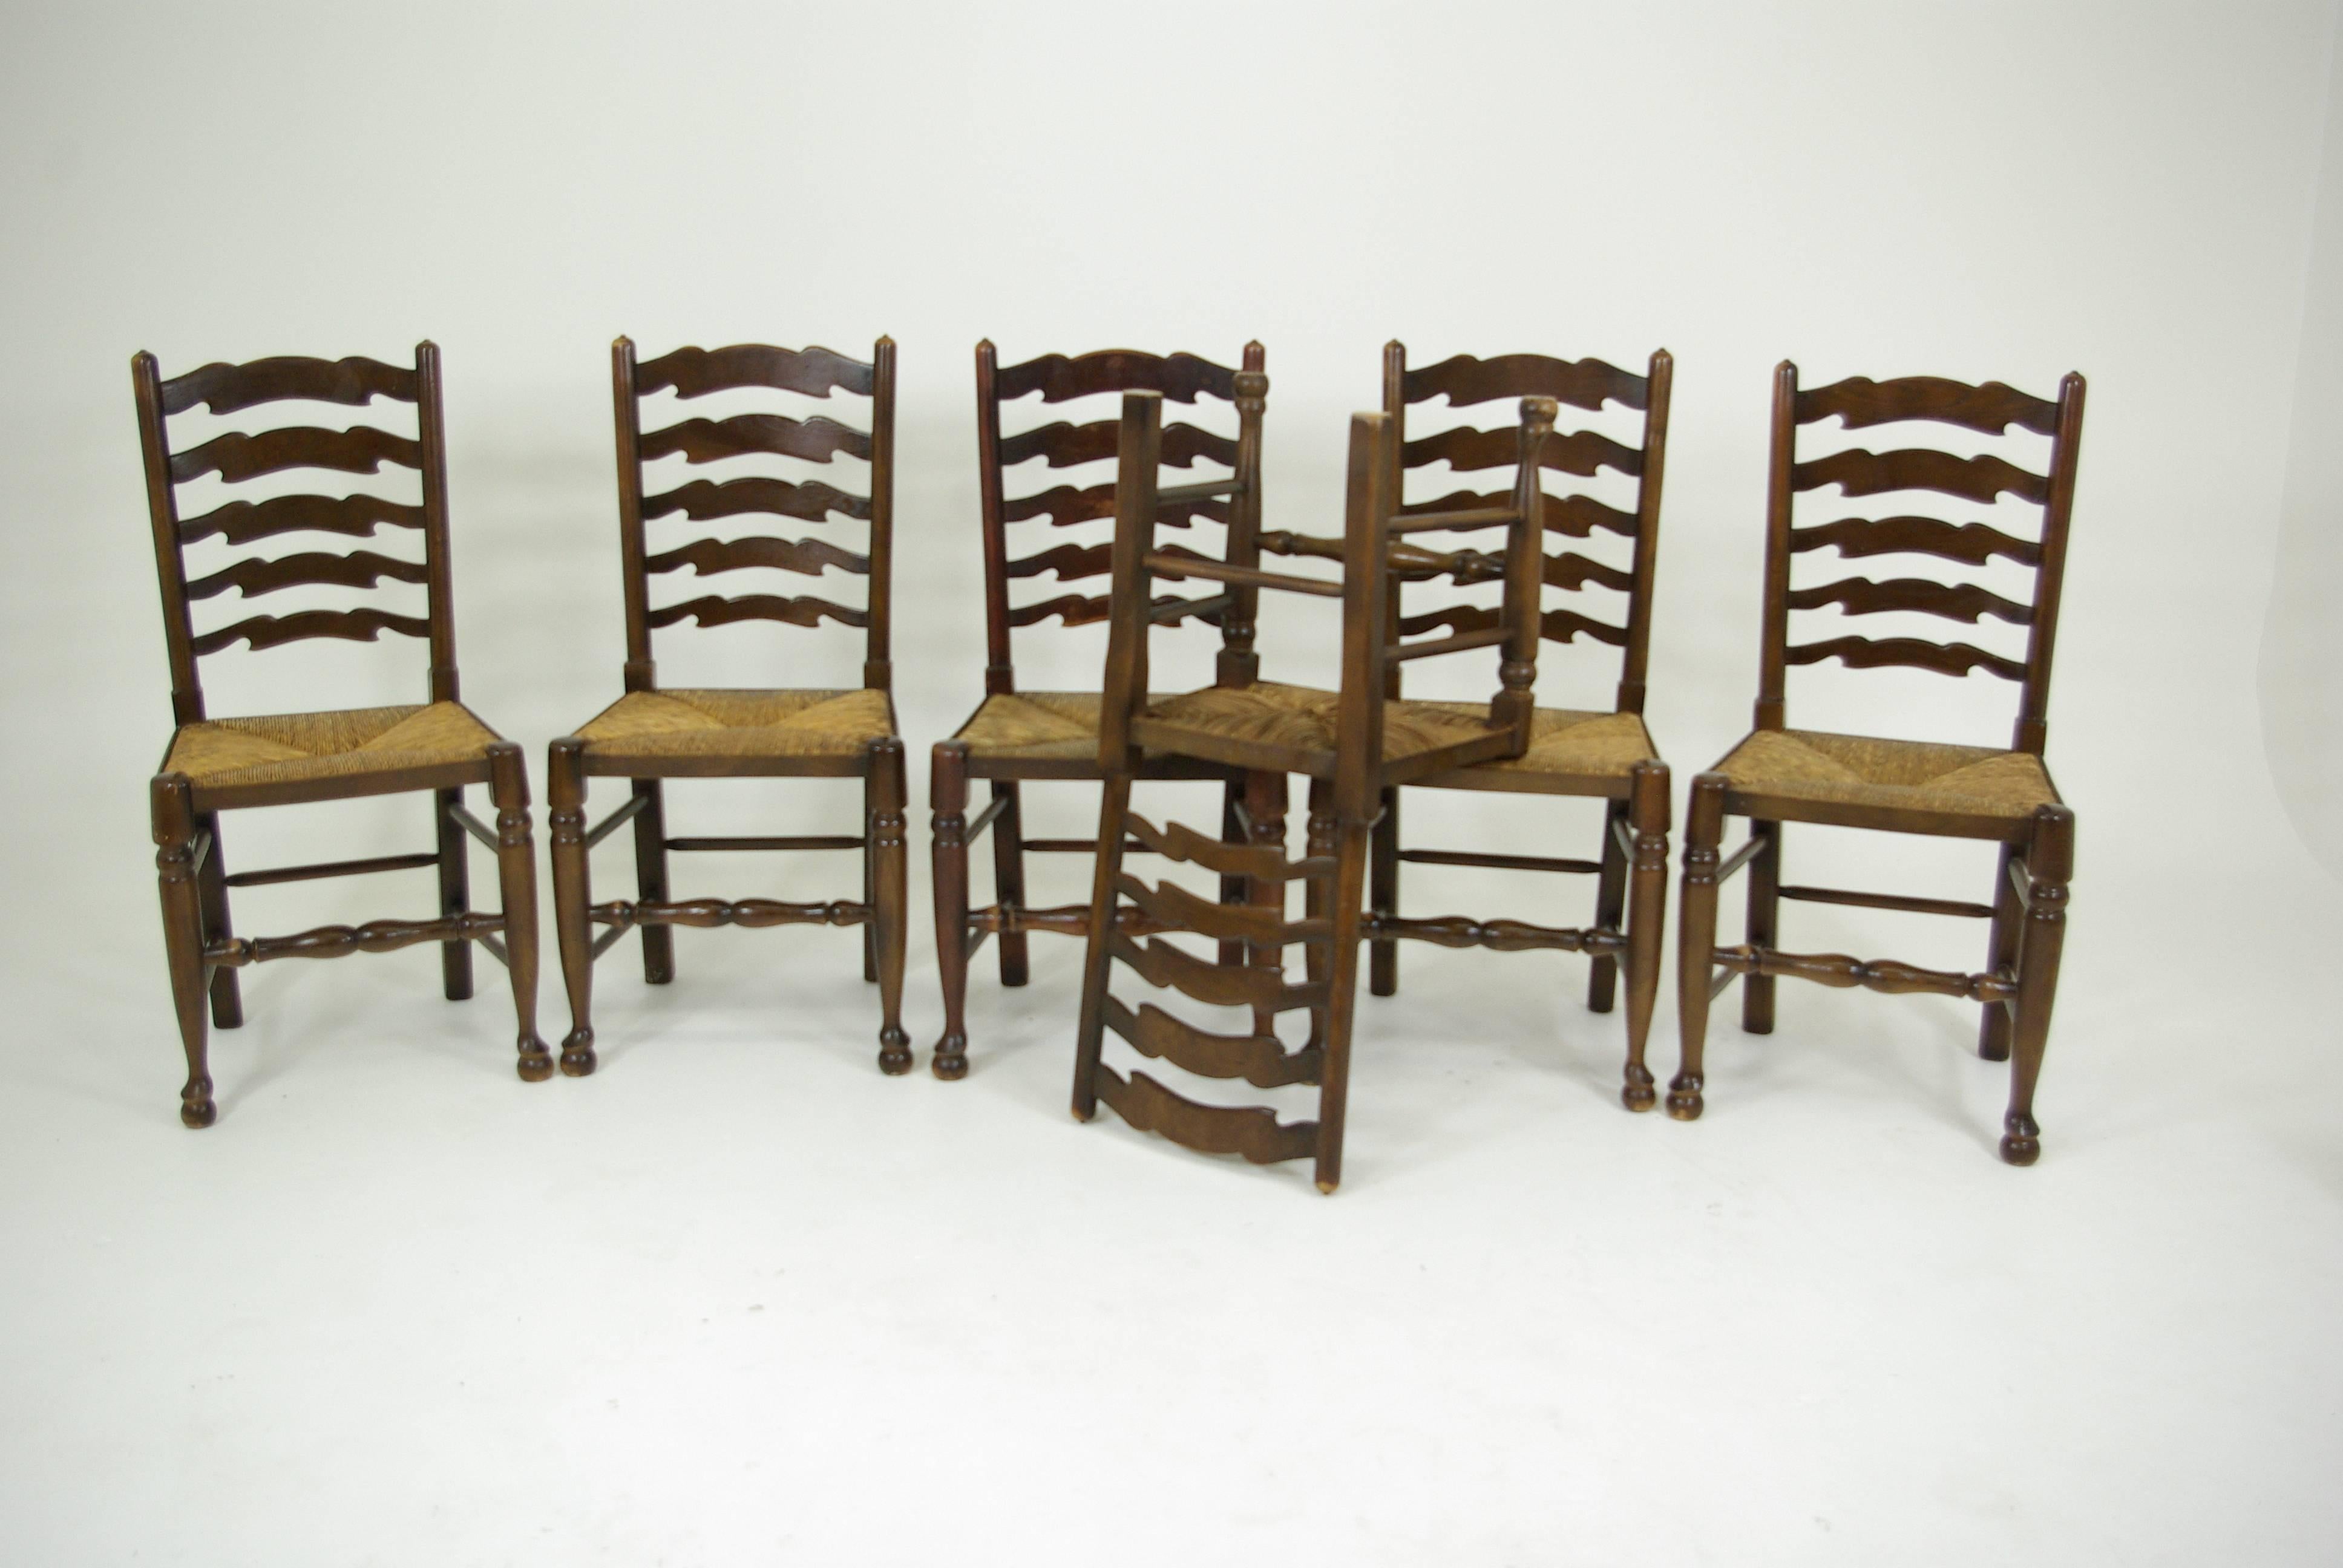 Elm Set of eight Antique Ladder Back Chairs, Rush Seats, Six + Two Armchairs